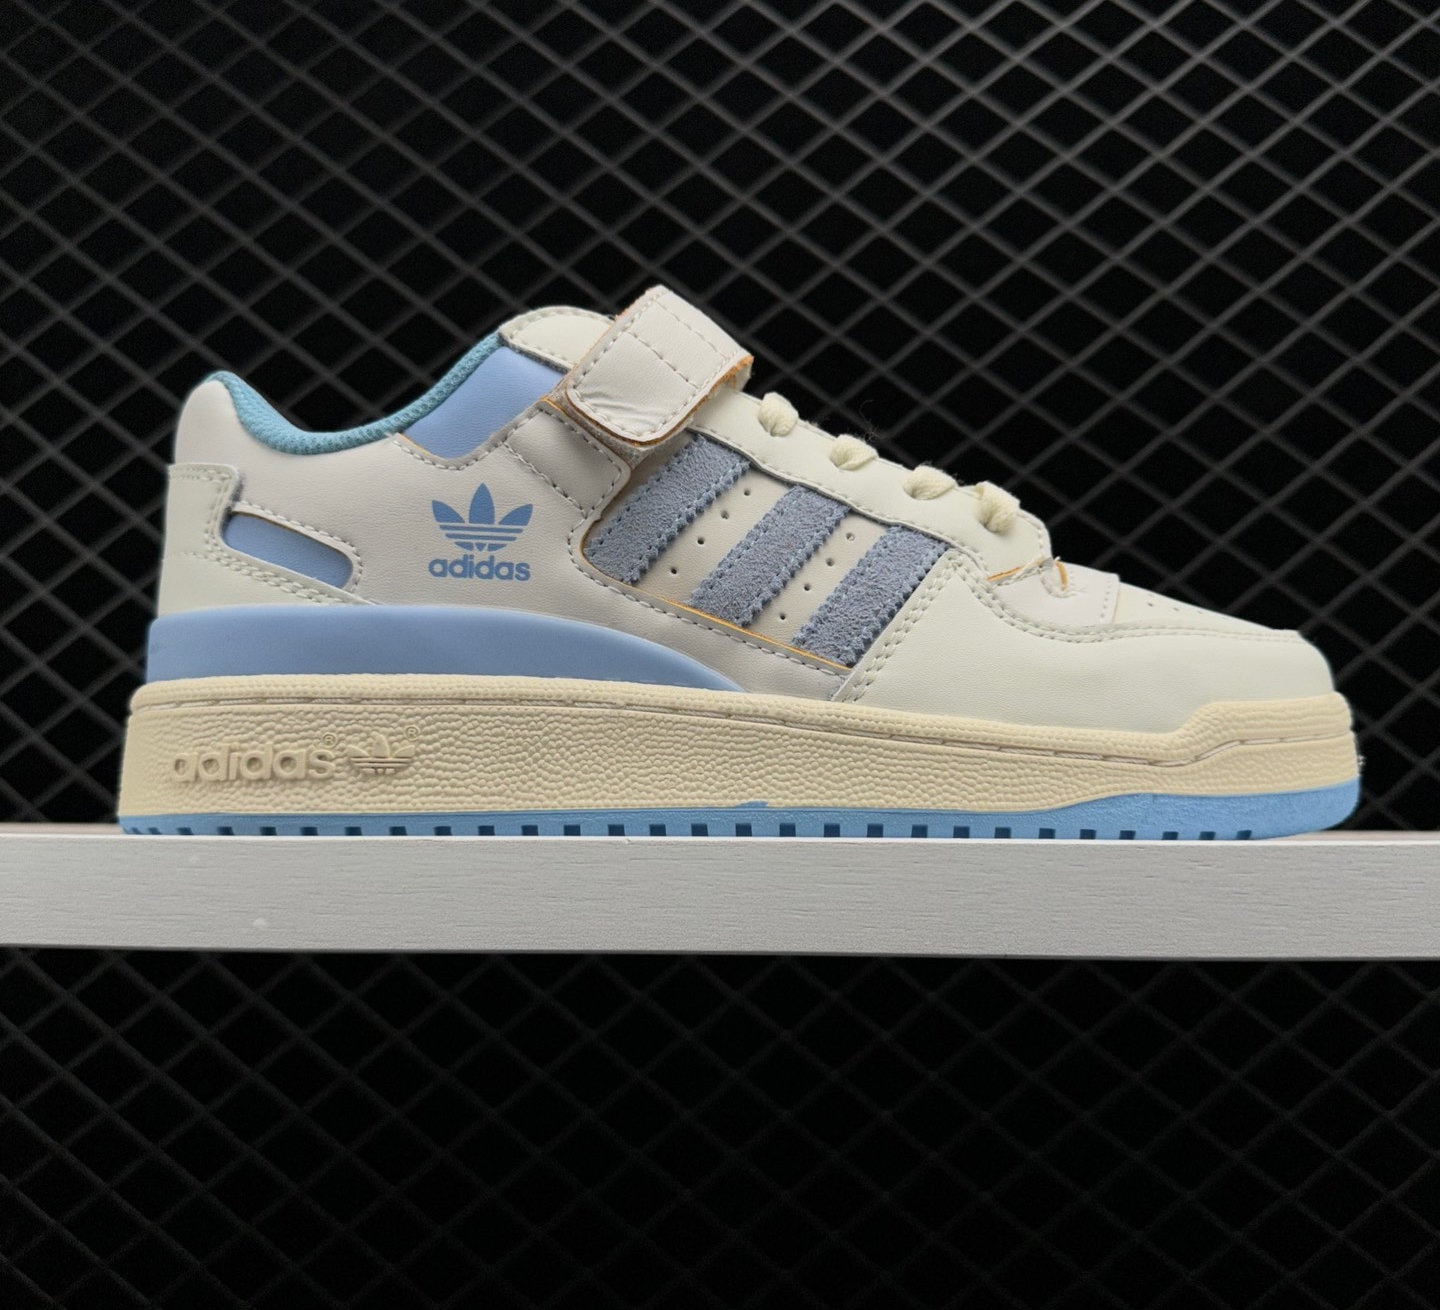 Adidas Forum 84 LG 'White Clear Sky' GZ1893 - Iconic Retro Sneakers